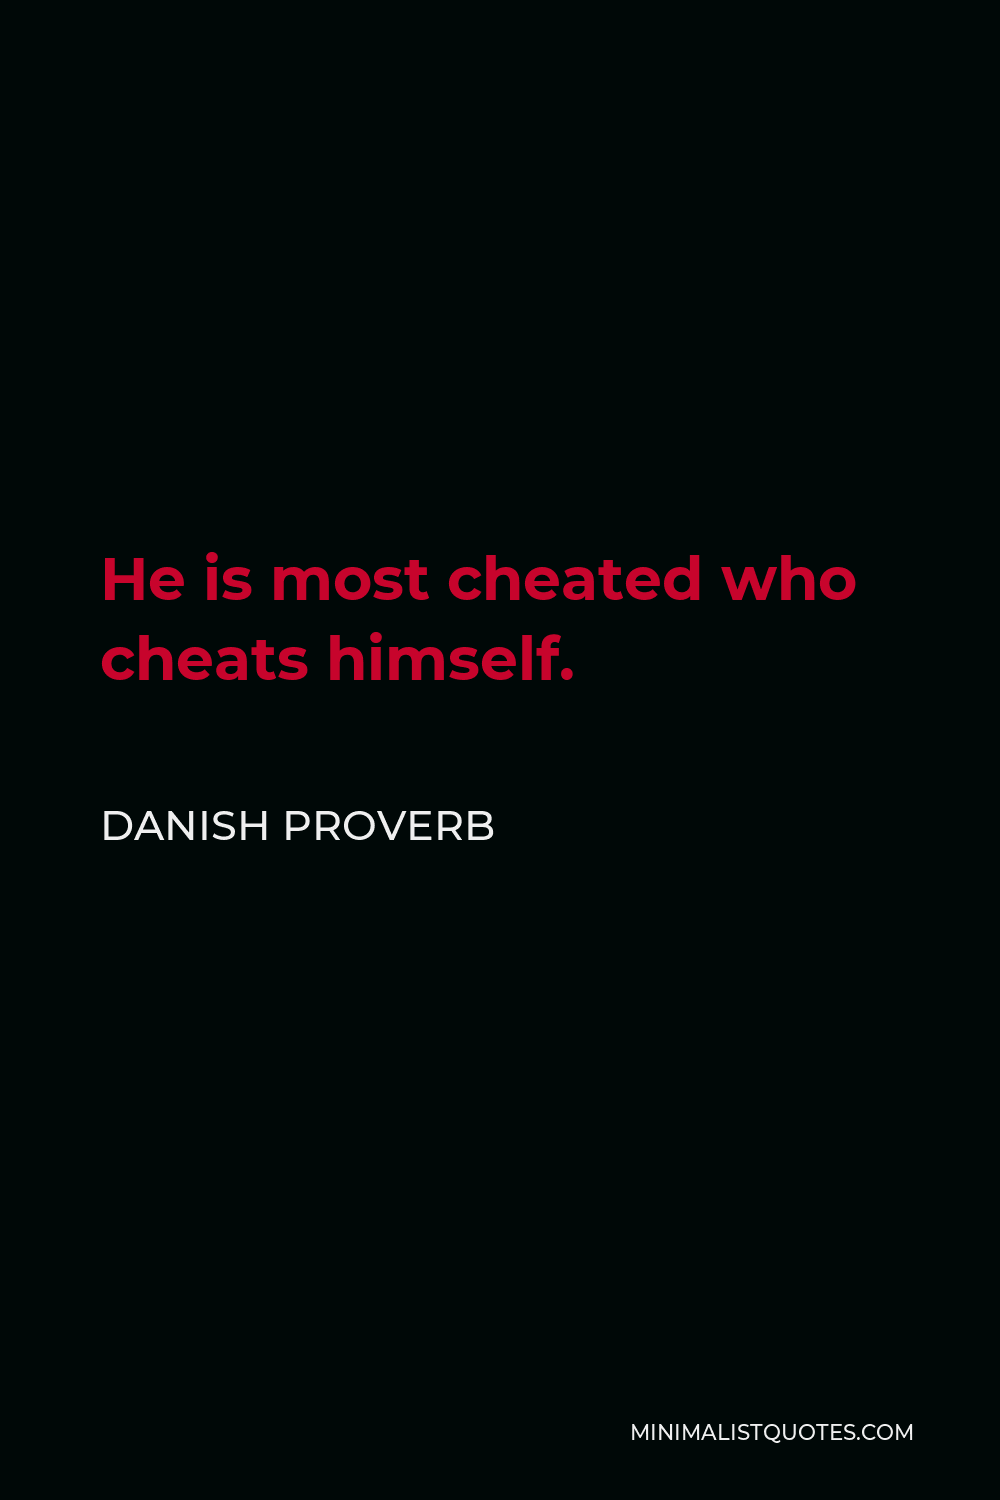 Danish Proverb Quote - He is most cheated who cheats himself.